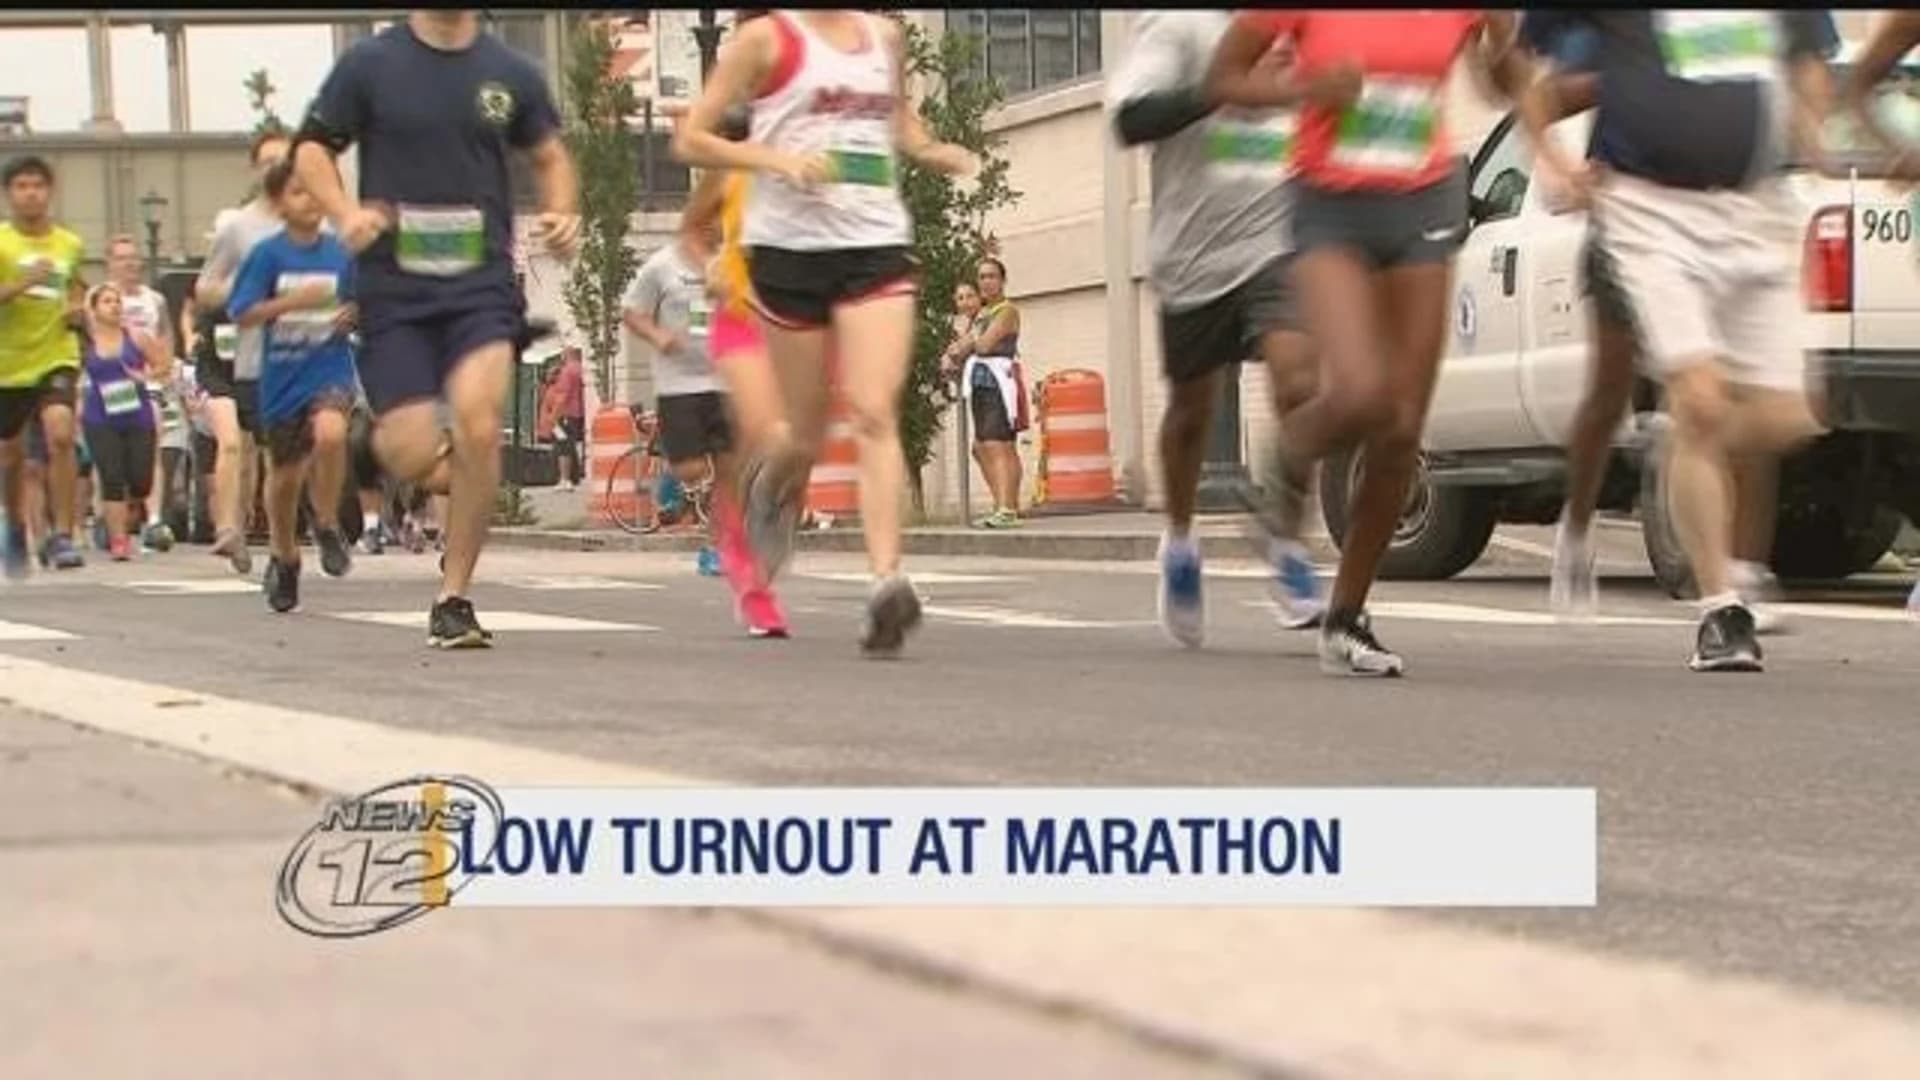 Yonkers Marathon sees low turnout this year